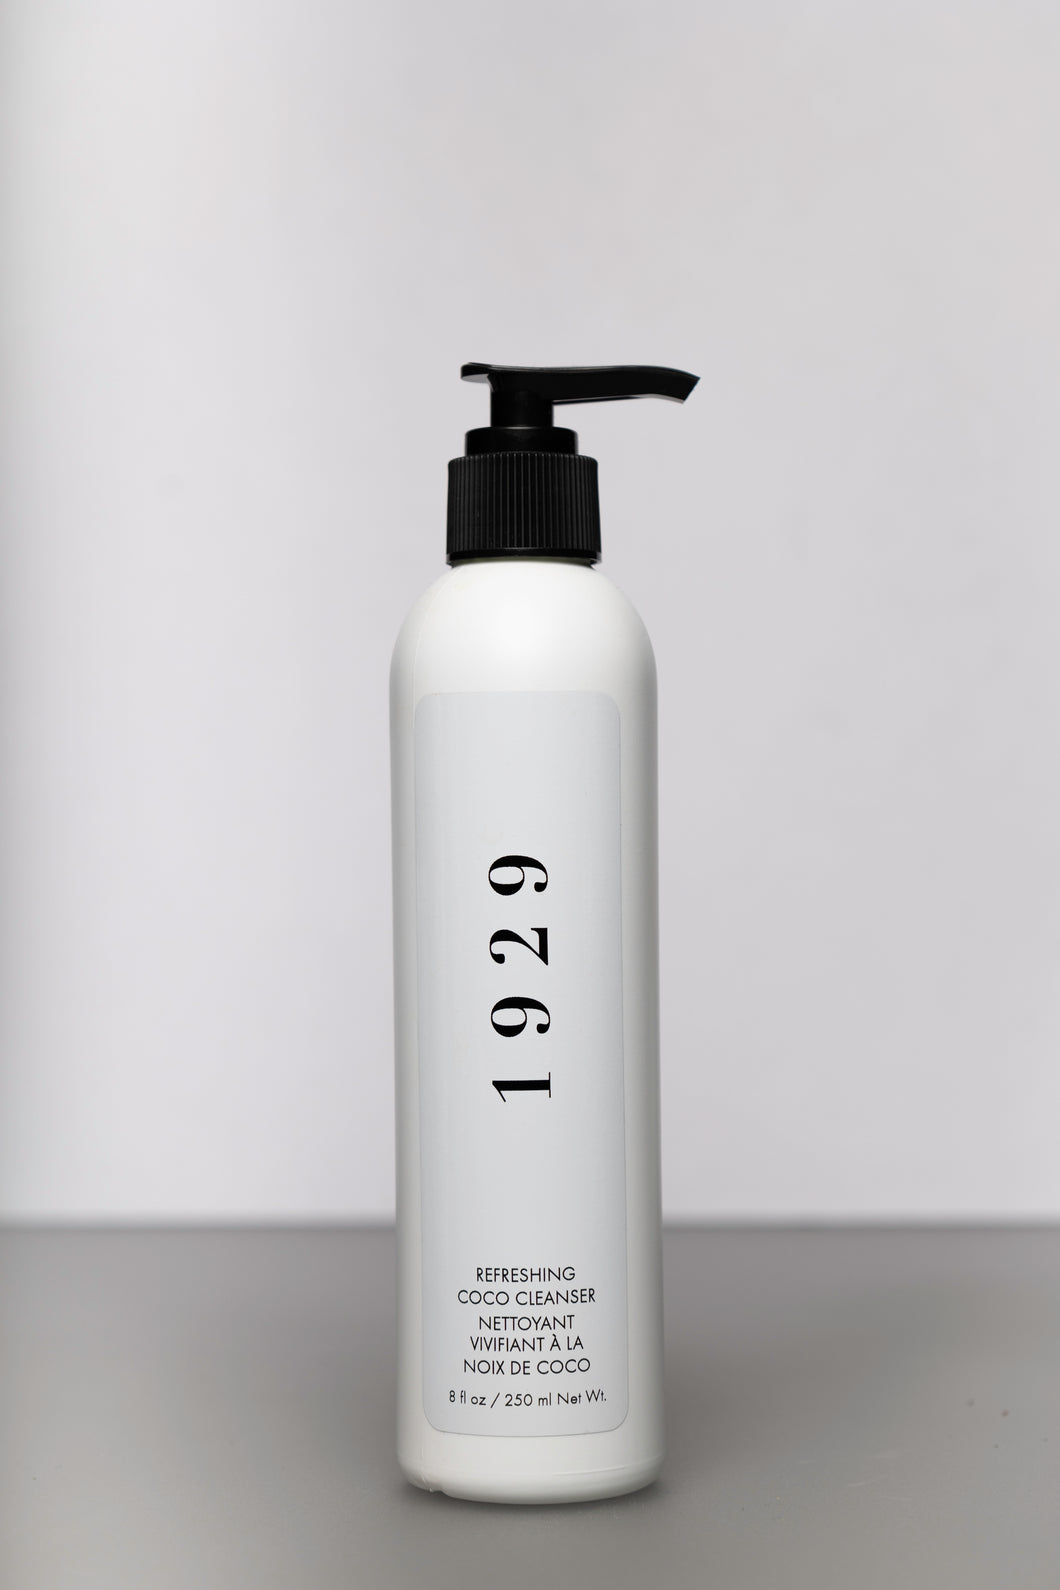 Refreshing Coco Cleanser